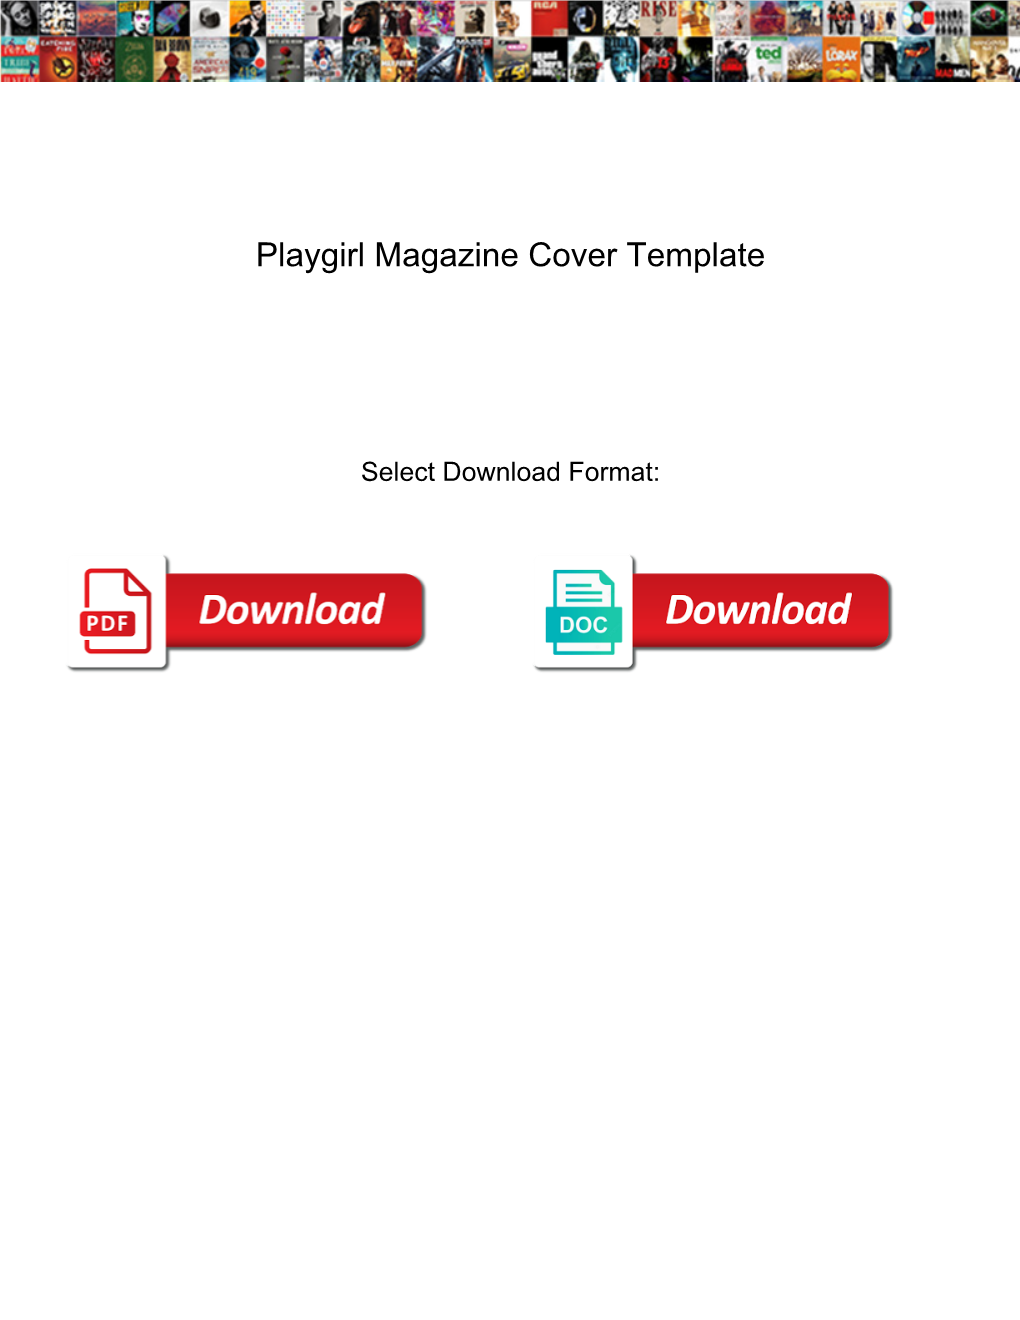 playgirl-magazine-cover-template-docslib